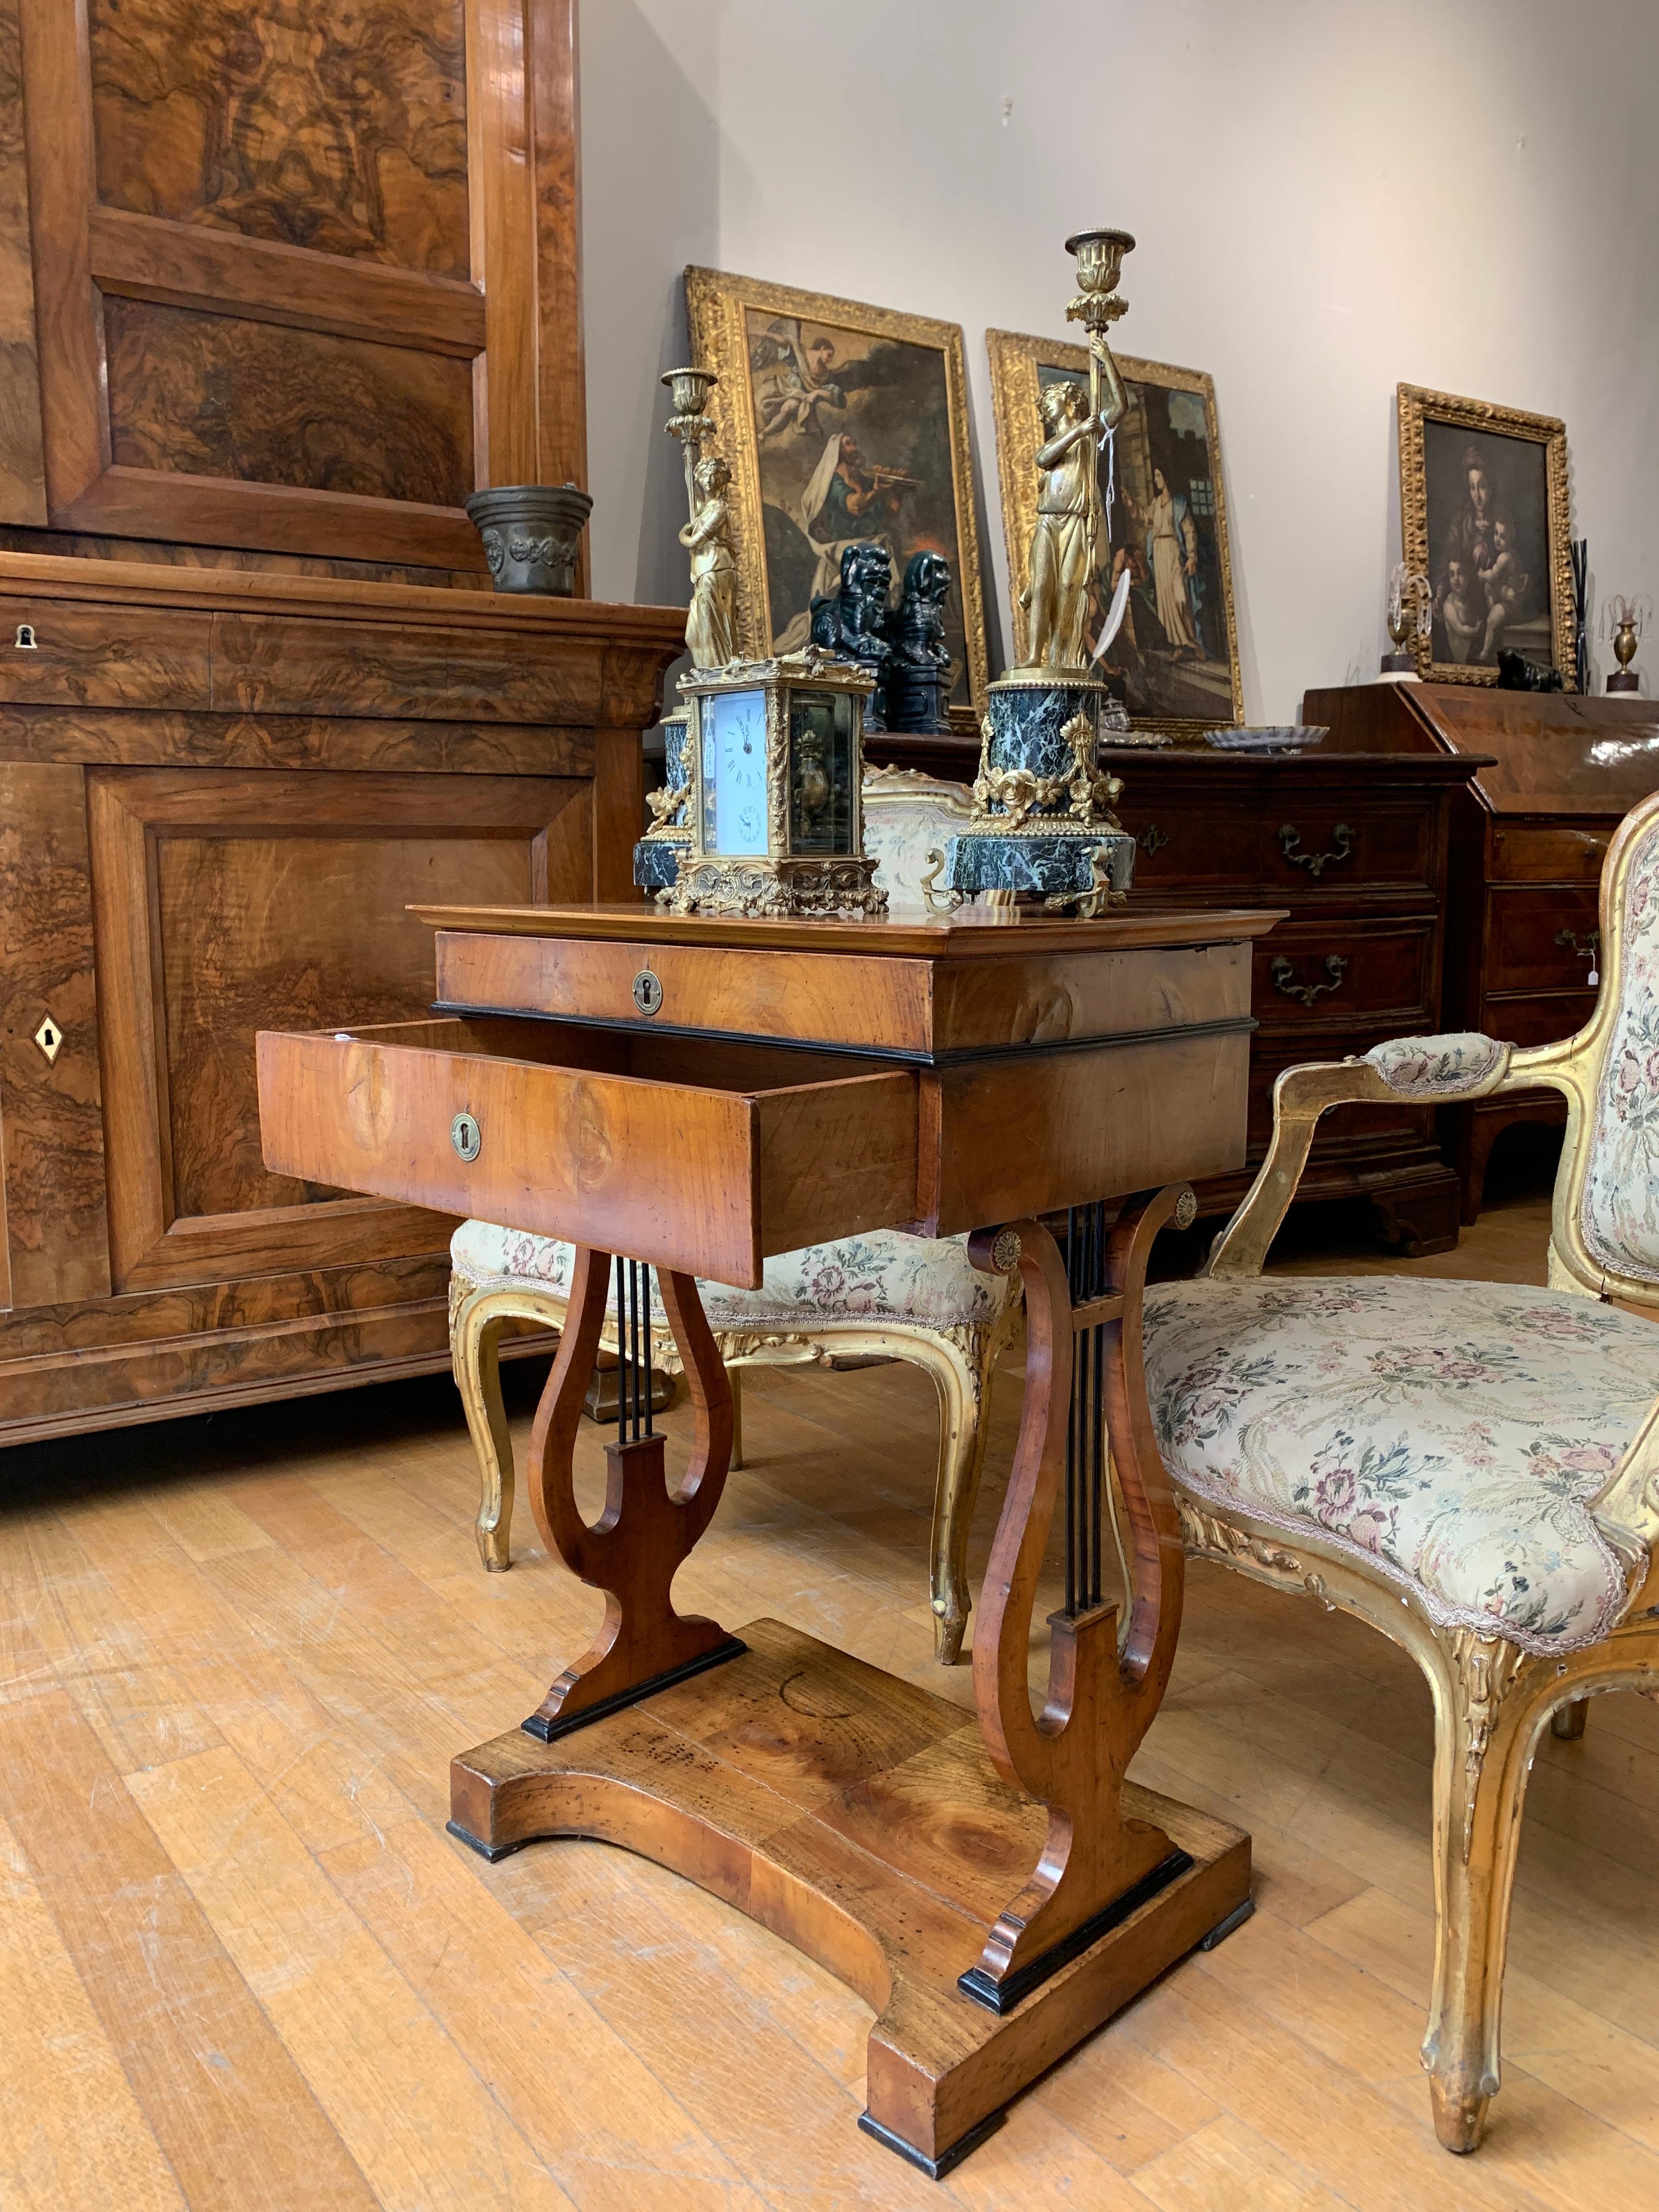 FIRST HALF OF THE 19th CENTURY CARLO X WORK TABLE  2